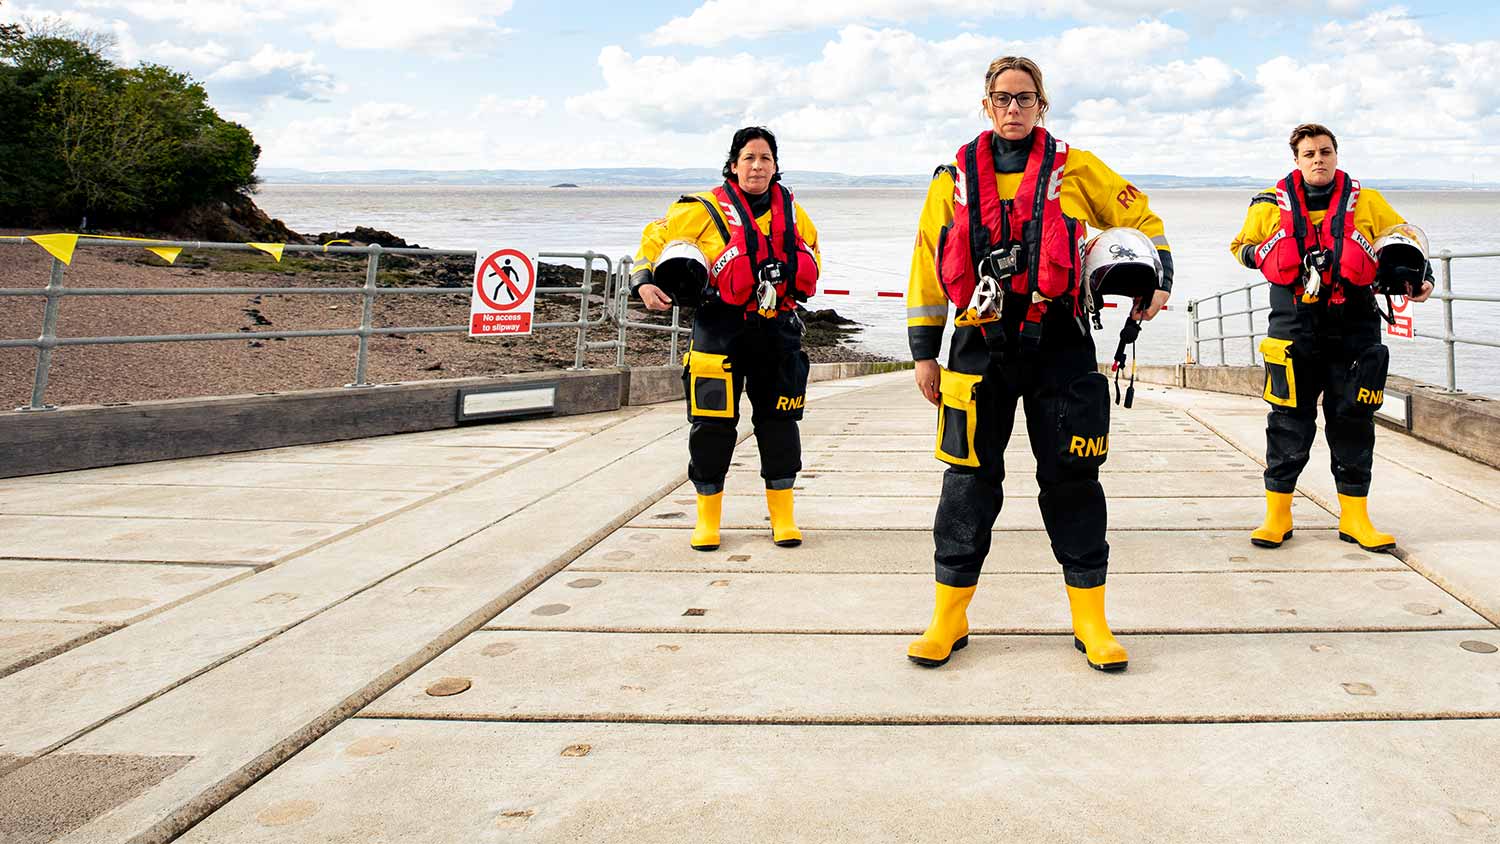 3 lifeboat crew female members in kit standing in triangle formation